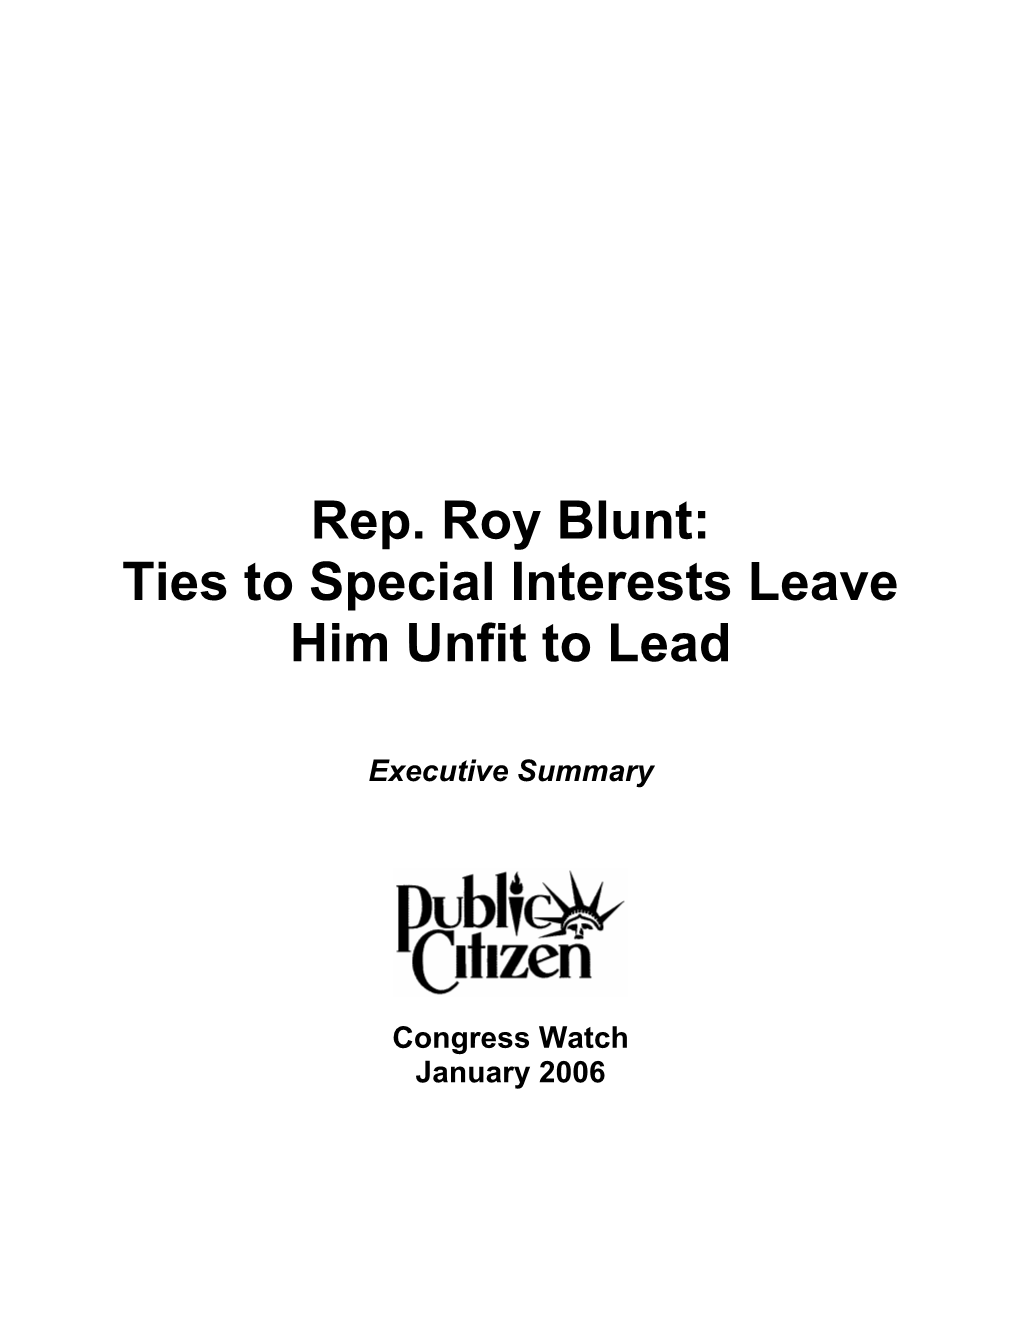 Rep. Roy Blunt: Ties to Special Interests Leave Him Unfit to Lead